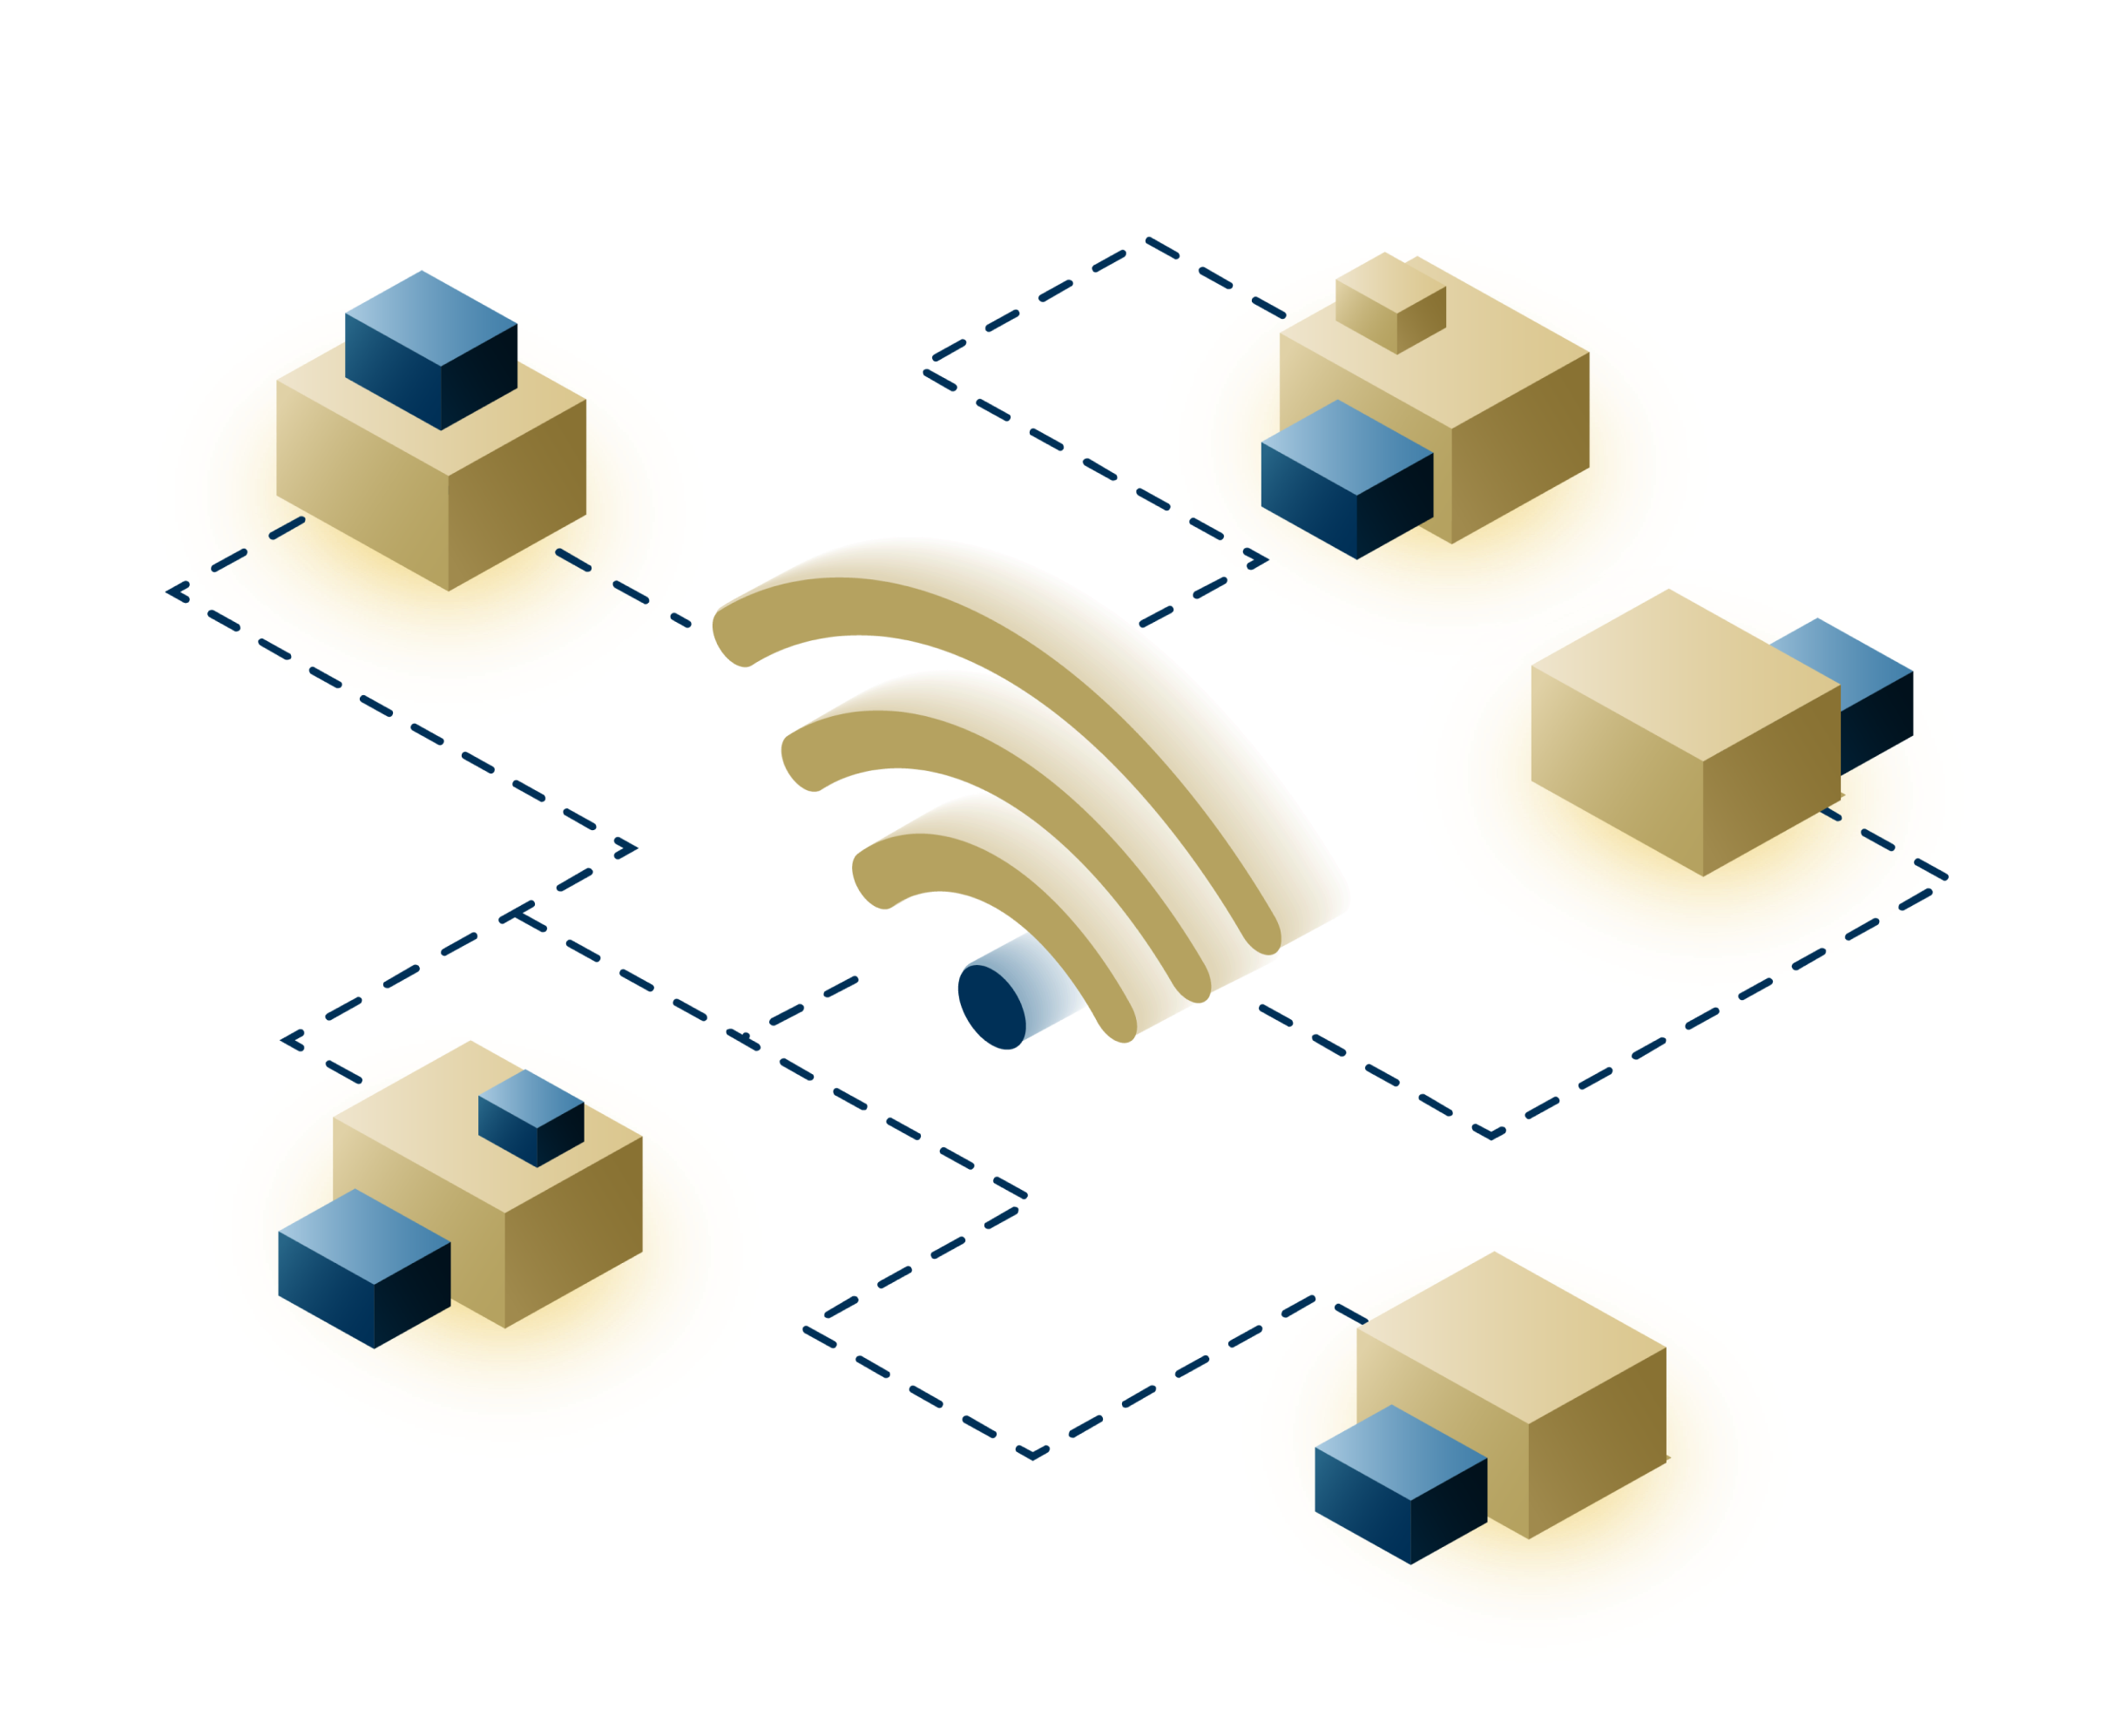 Image of terminals connected via GT Wi-Fi network